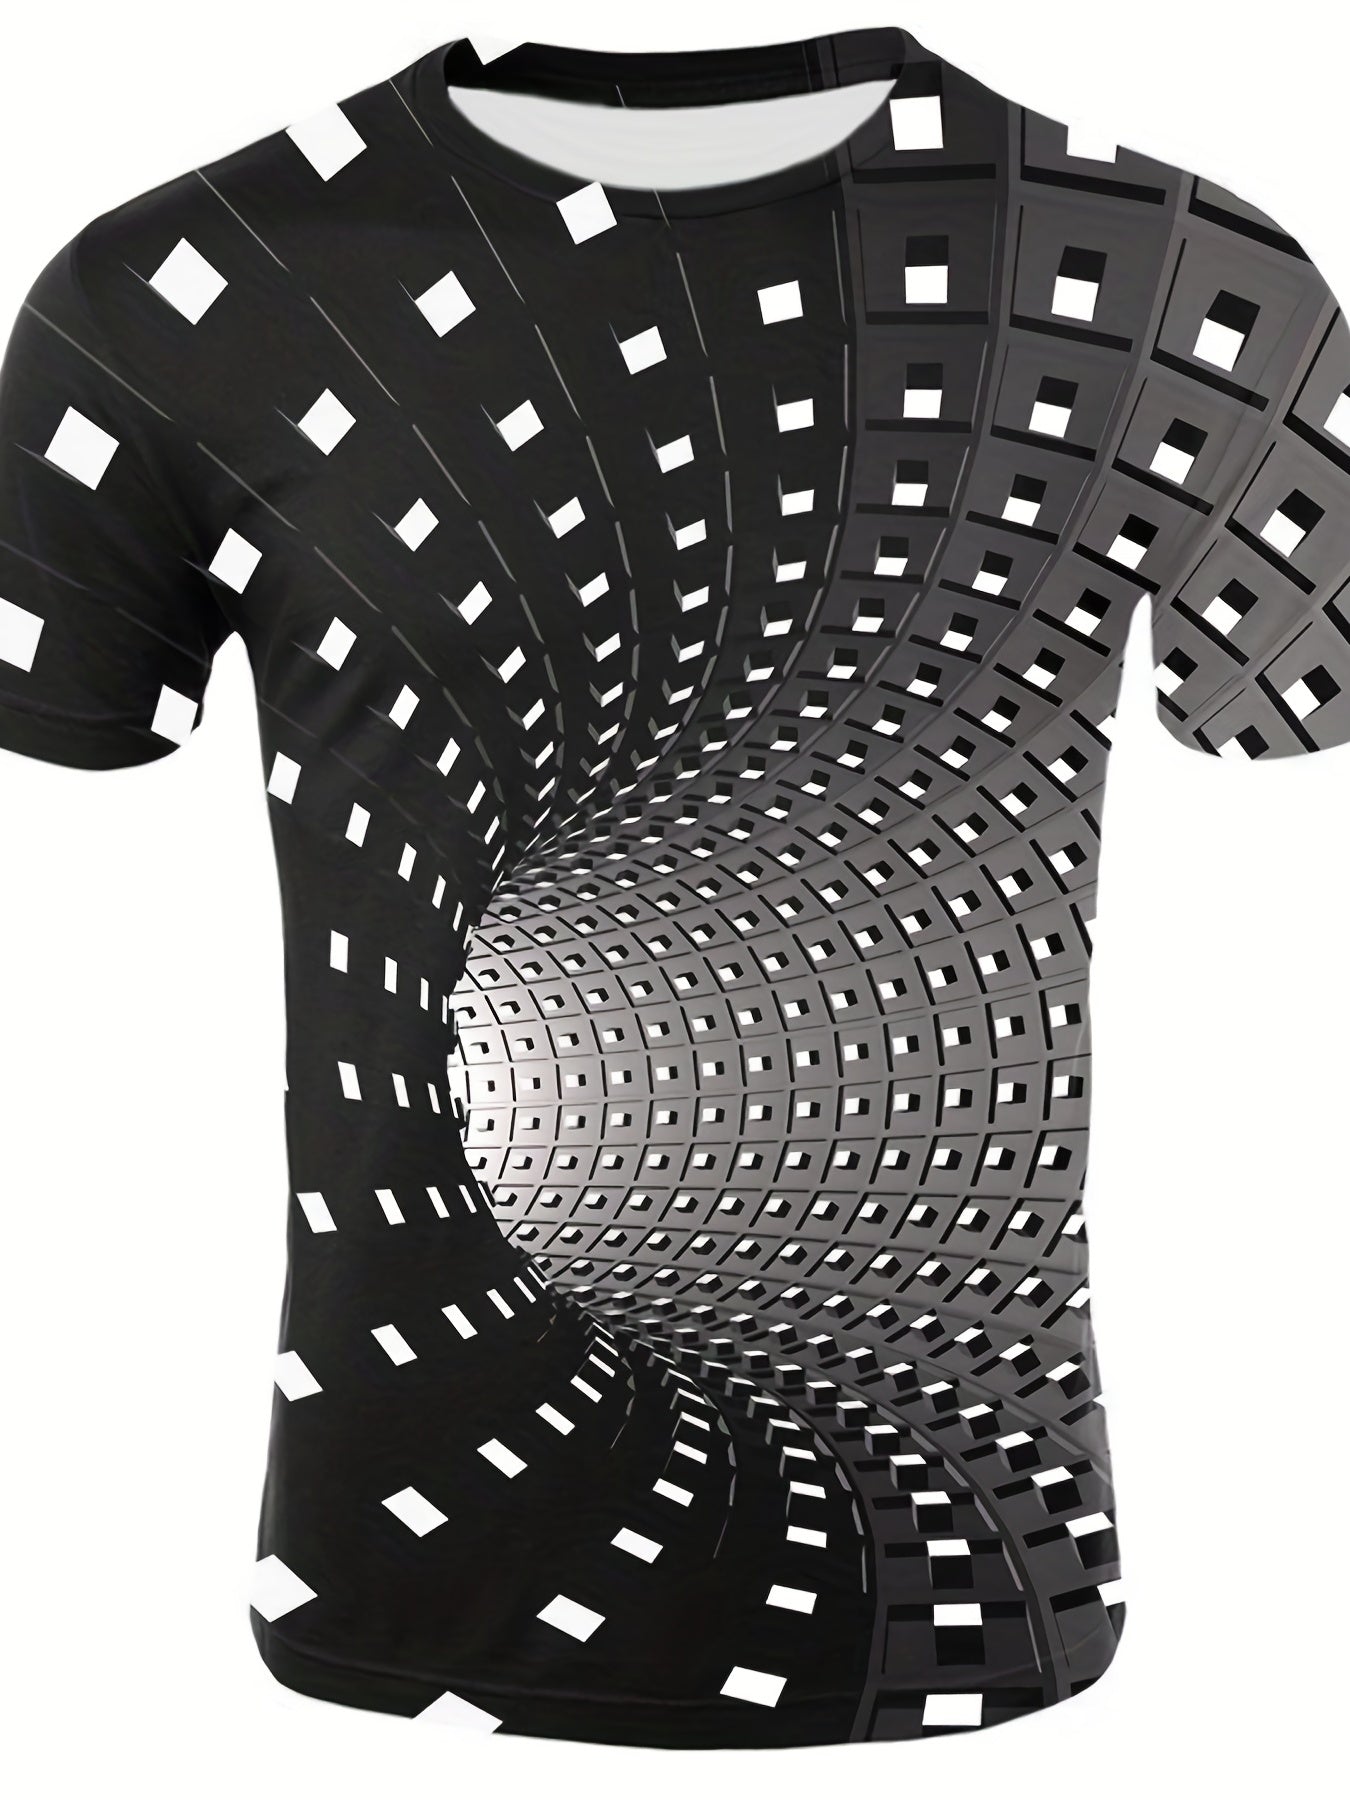 Men's Optical Illusion Black and White T-Shirt - Unique Design for Summer Style and Comfort